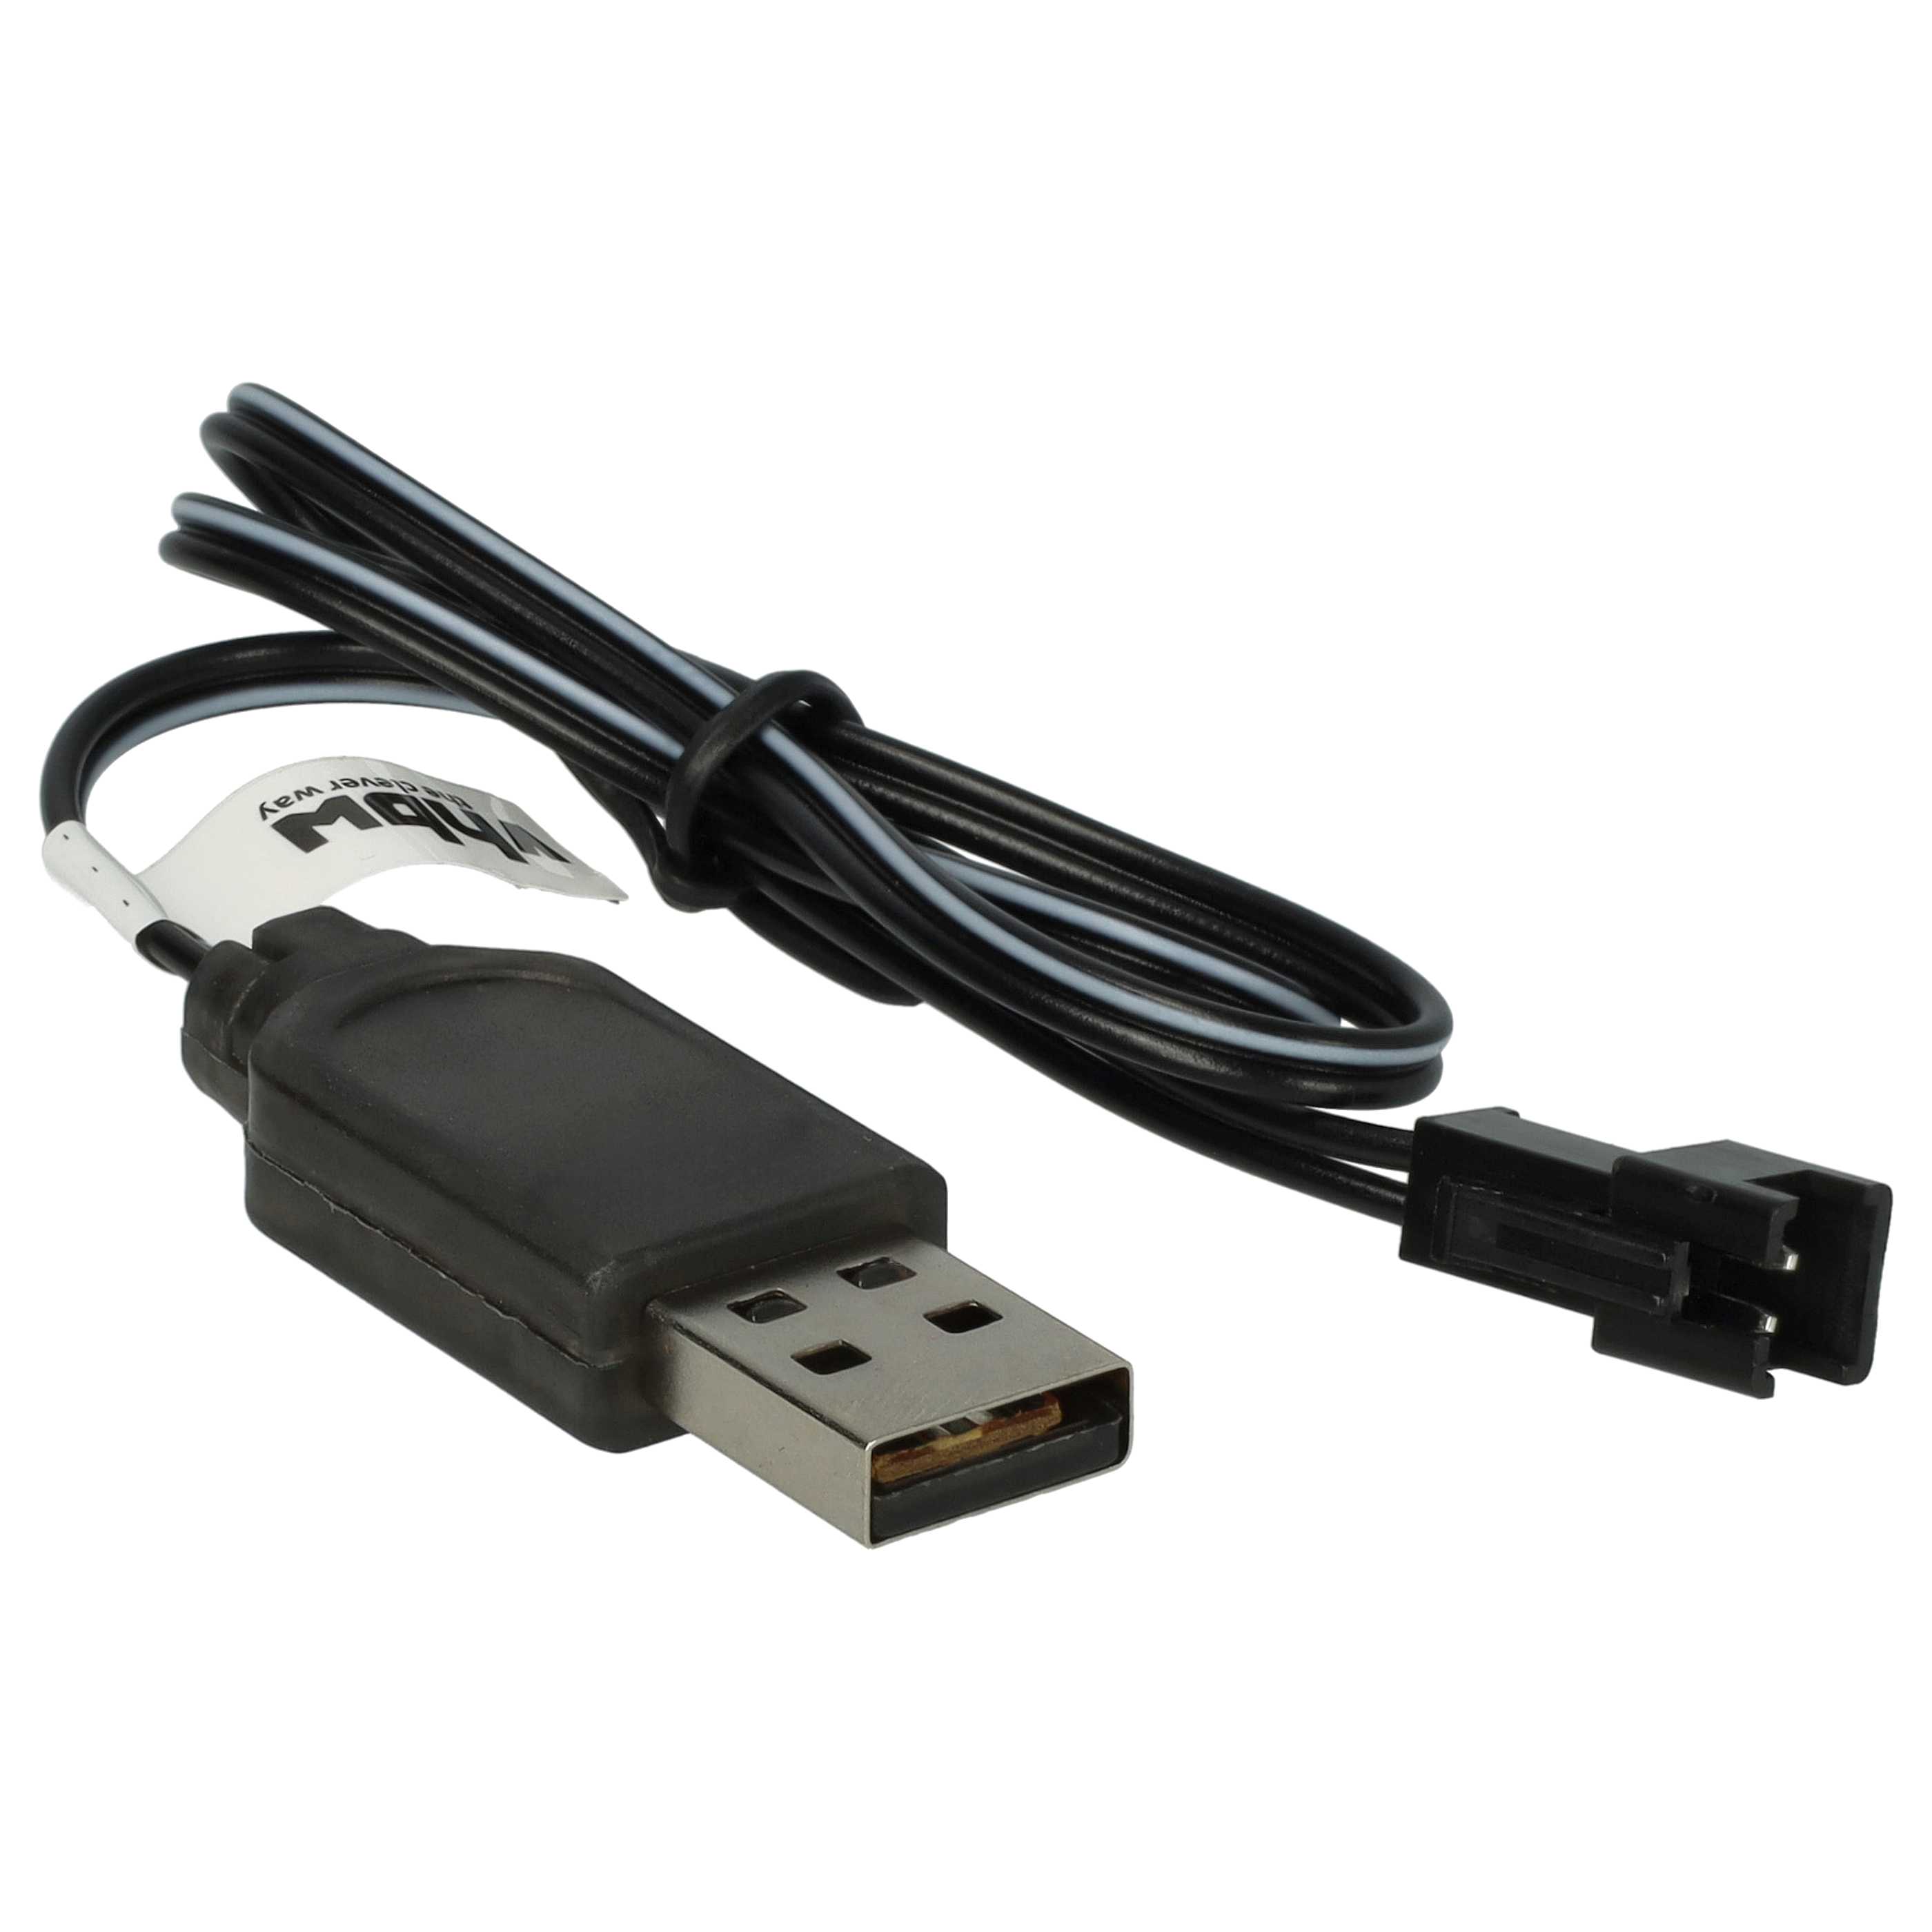 USB Charging Cable suitable for RC Batteries with SM-2P Connector, RC Model Making Battery Packs - 60 cm 3.6 V